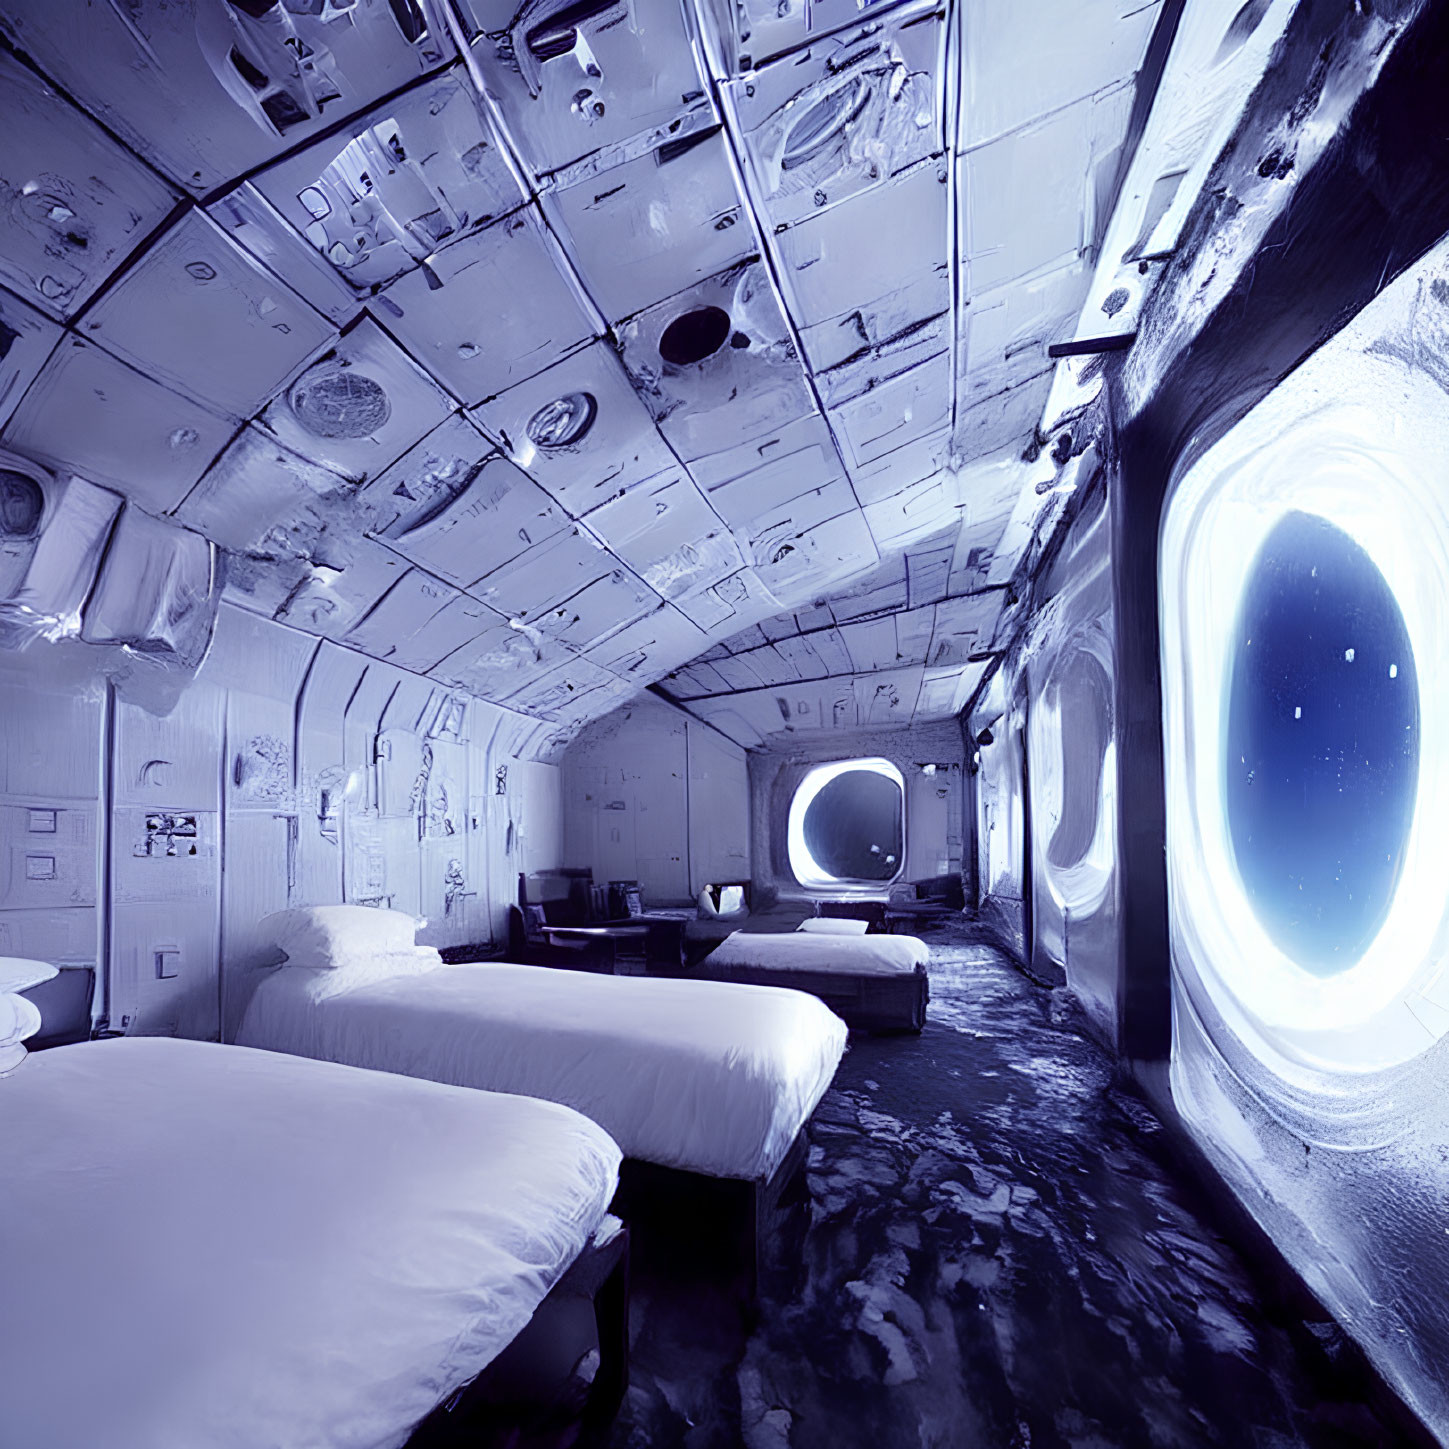 Space-themed Bedroom with Two Beds and Starry Circular Windows